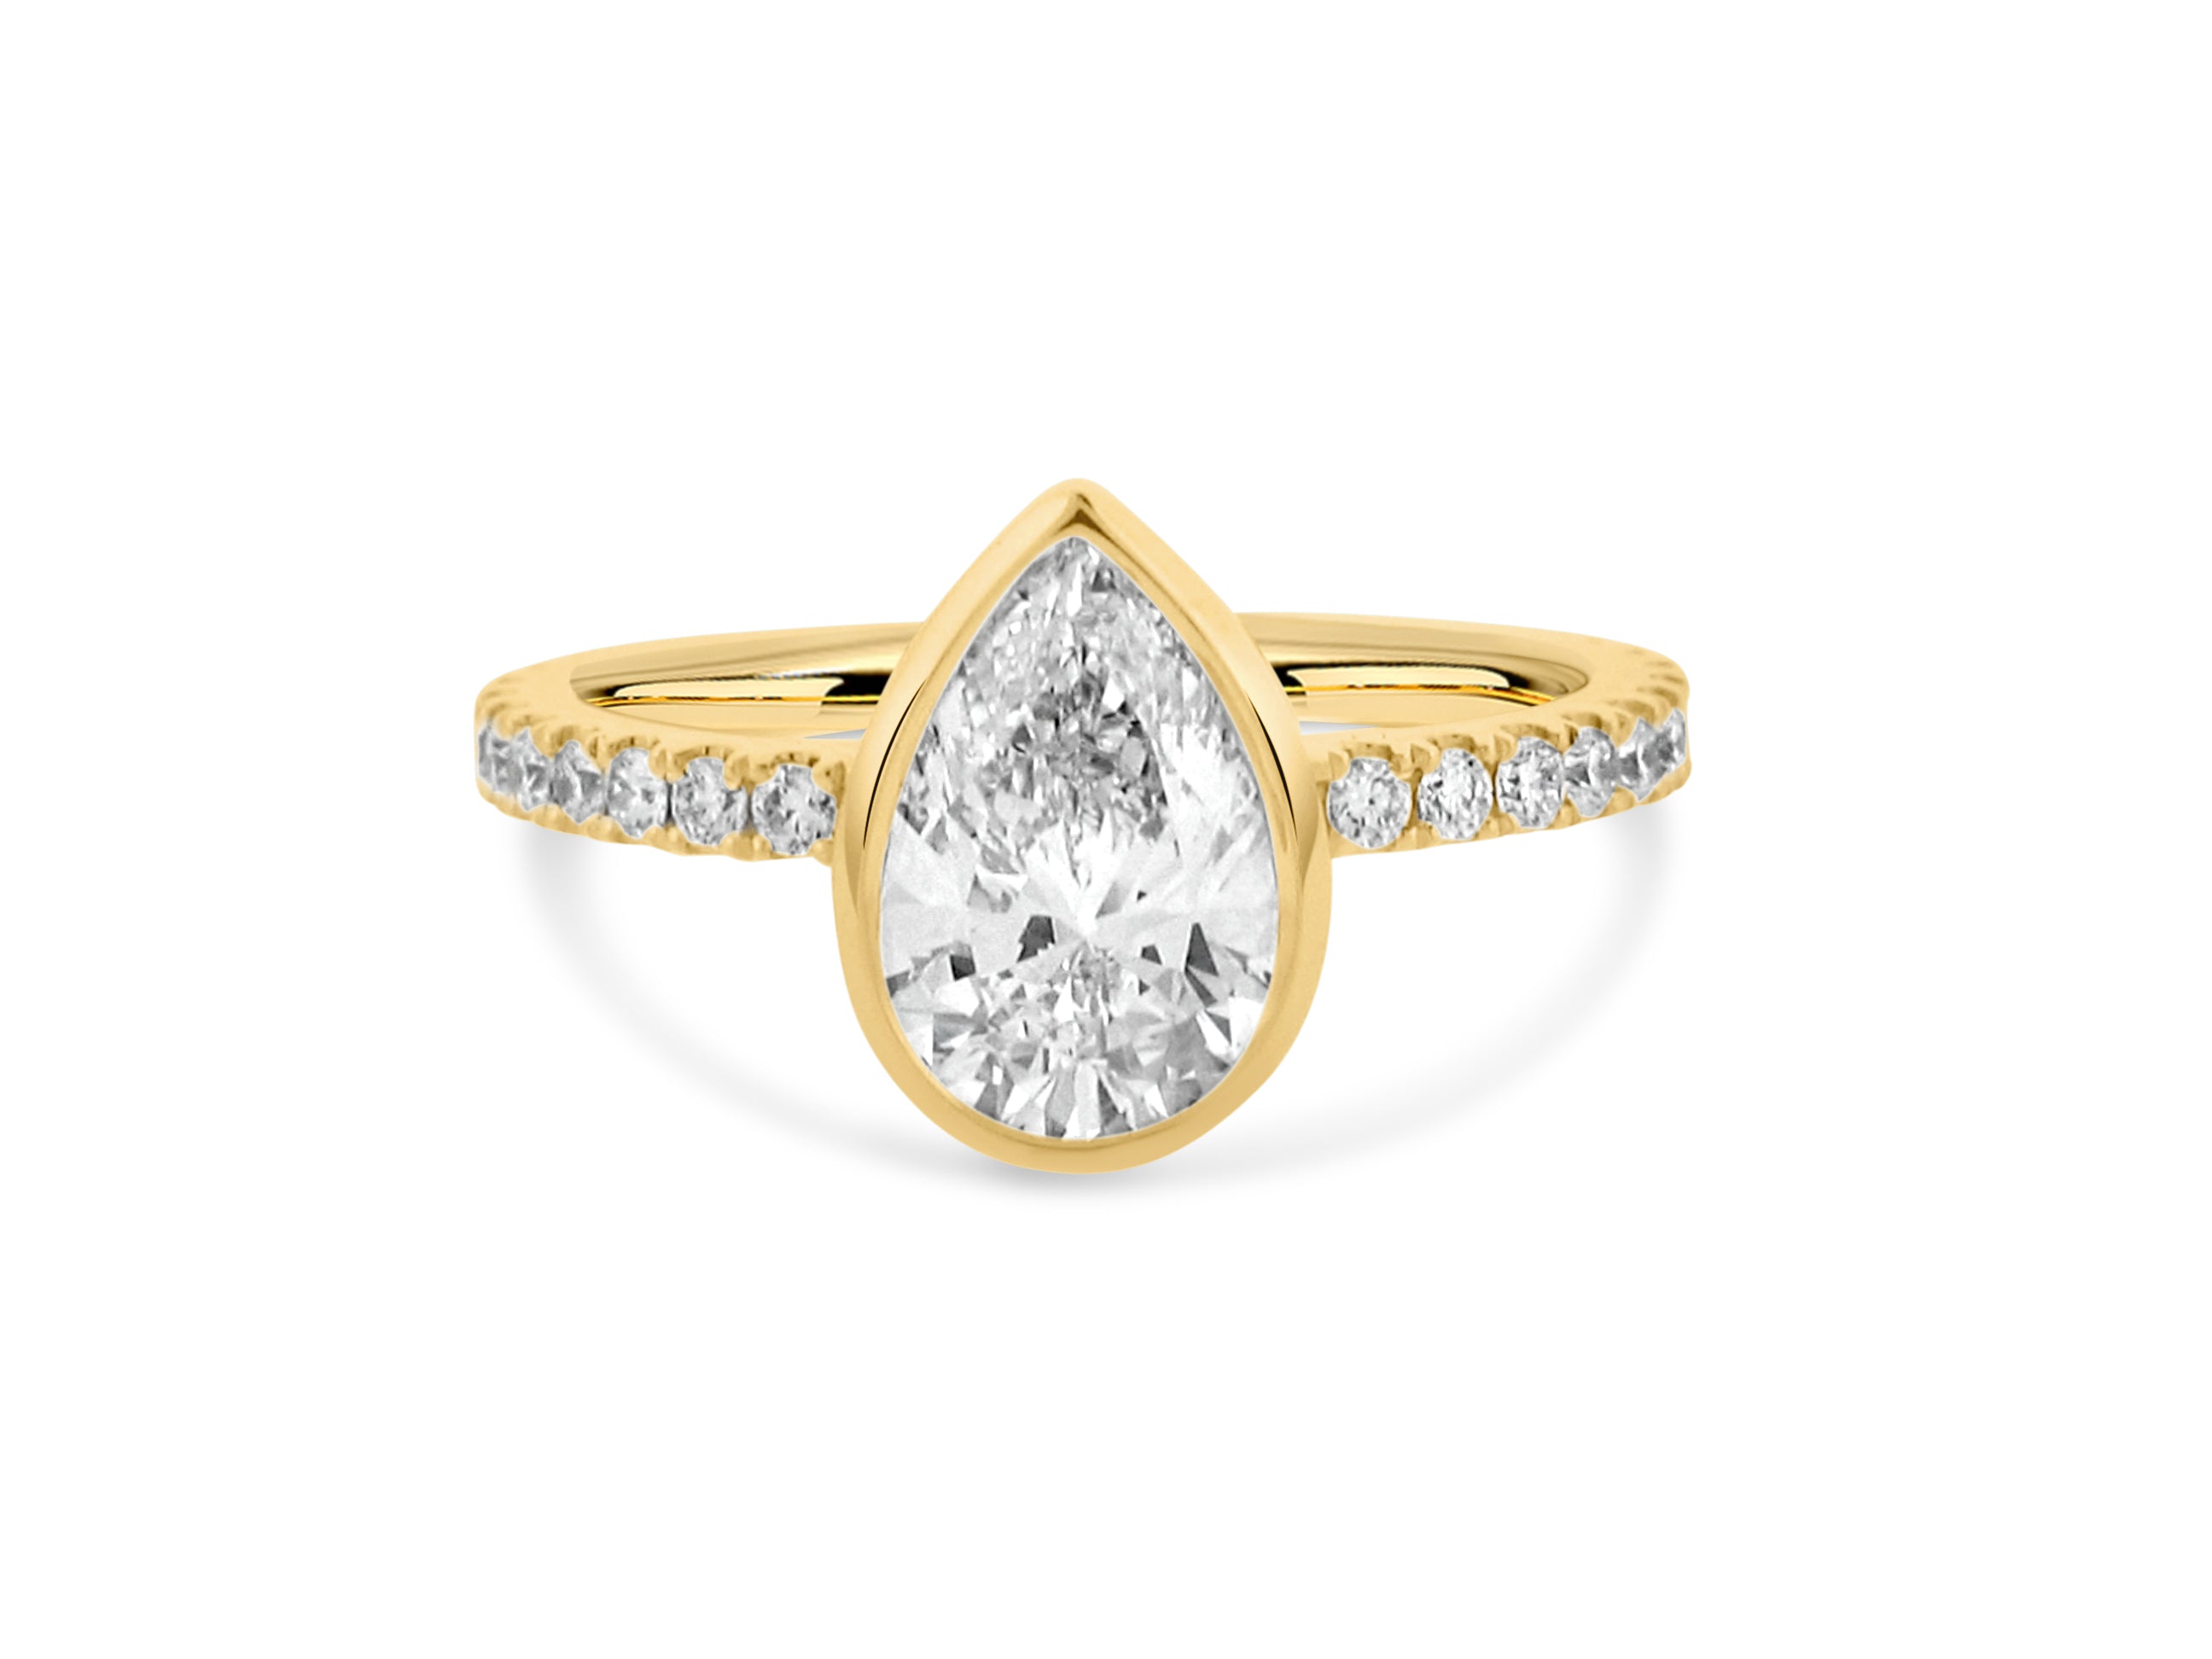 PRIVE' 18K YELLOW GOLD 1.50CT SI1 CLARITY AND E COLOR PEAR SHAPED LAB GROWN SWAROVSKI DIAMOND.  CERTIFIED. .28CT SI-G ACCENT NATURAL DIAMONDS